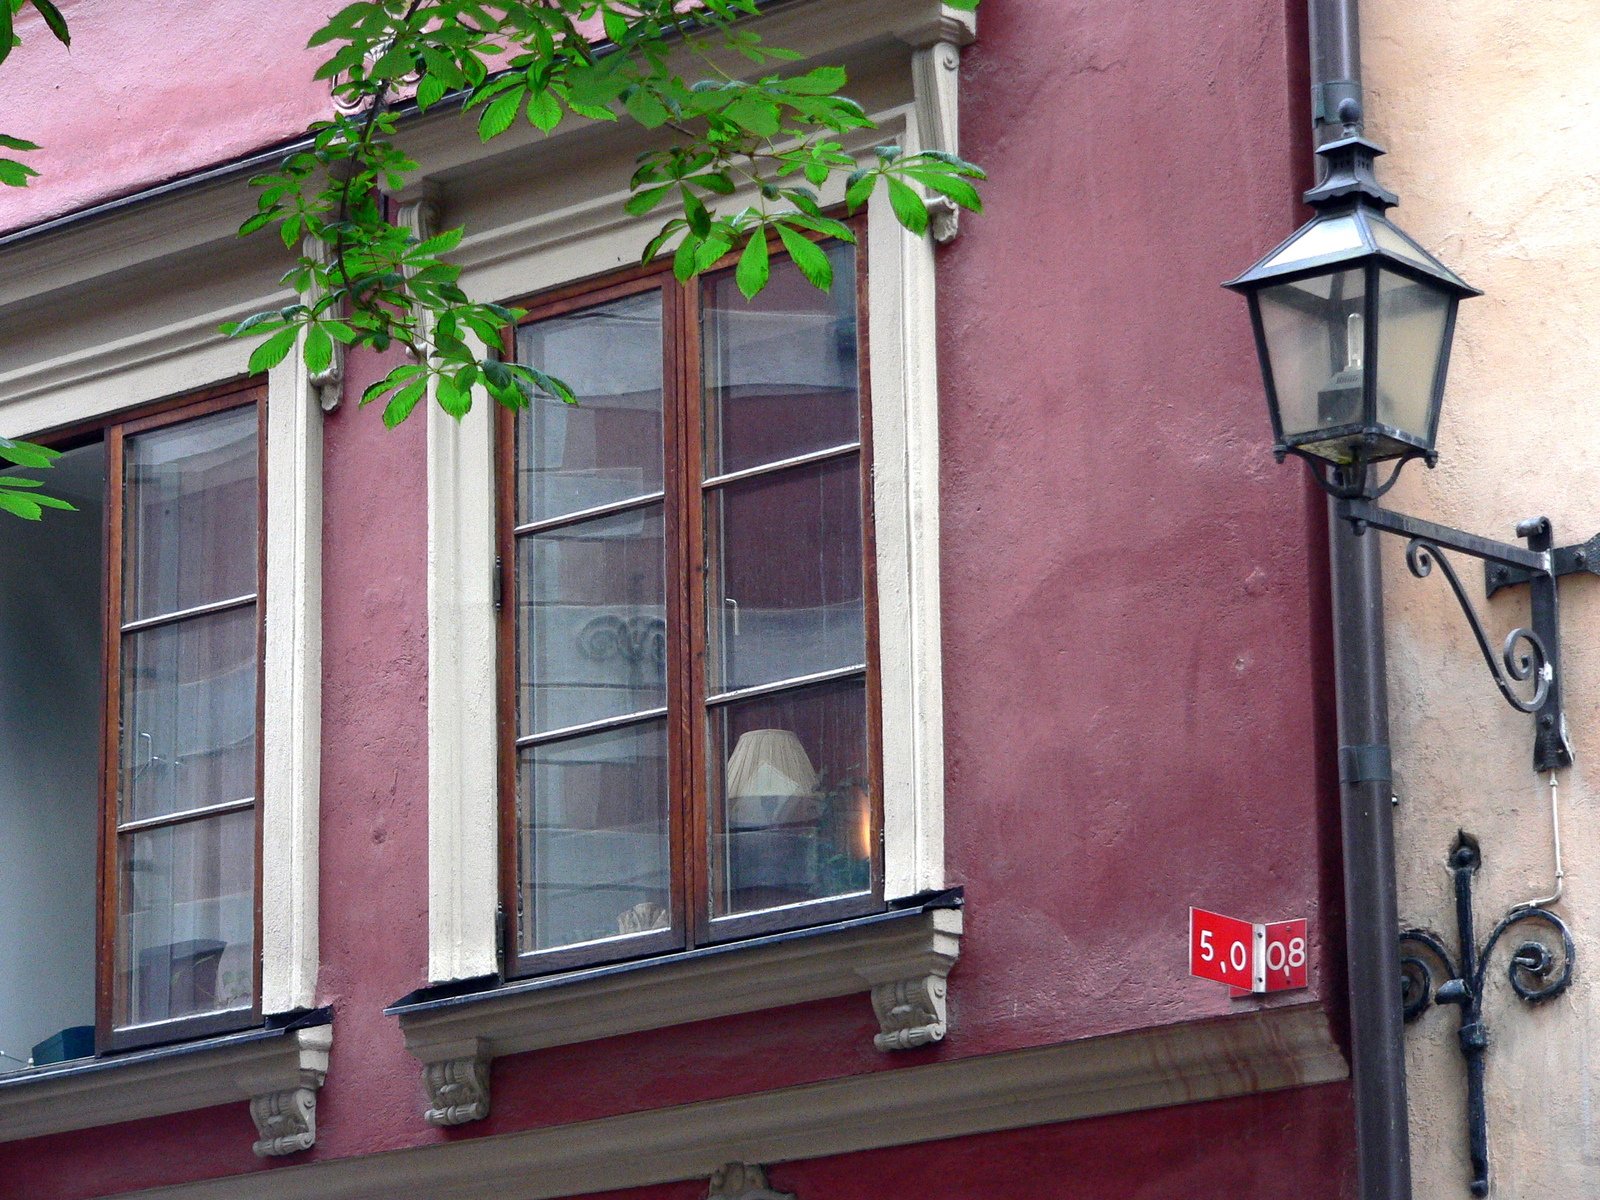 a large brown building with some windows and a red street sign